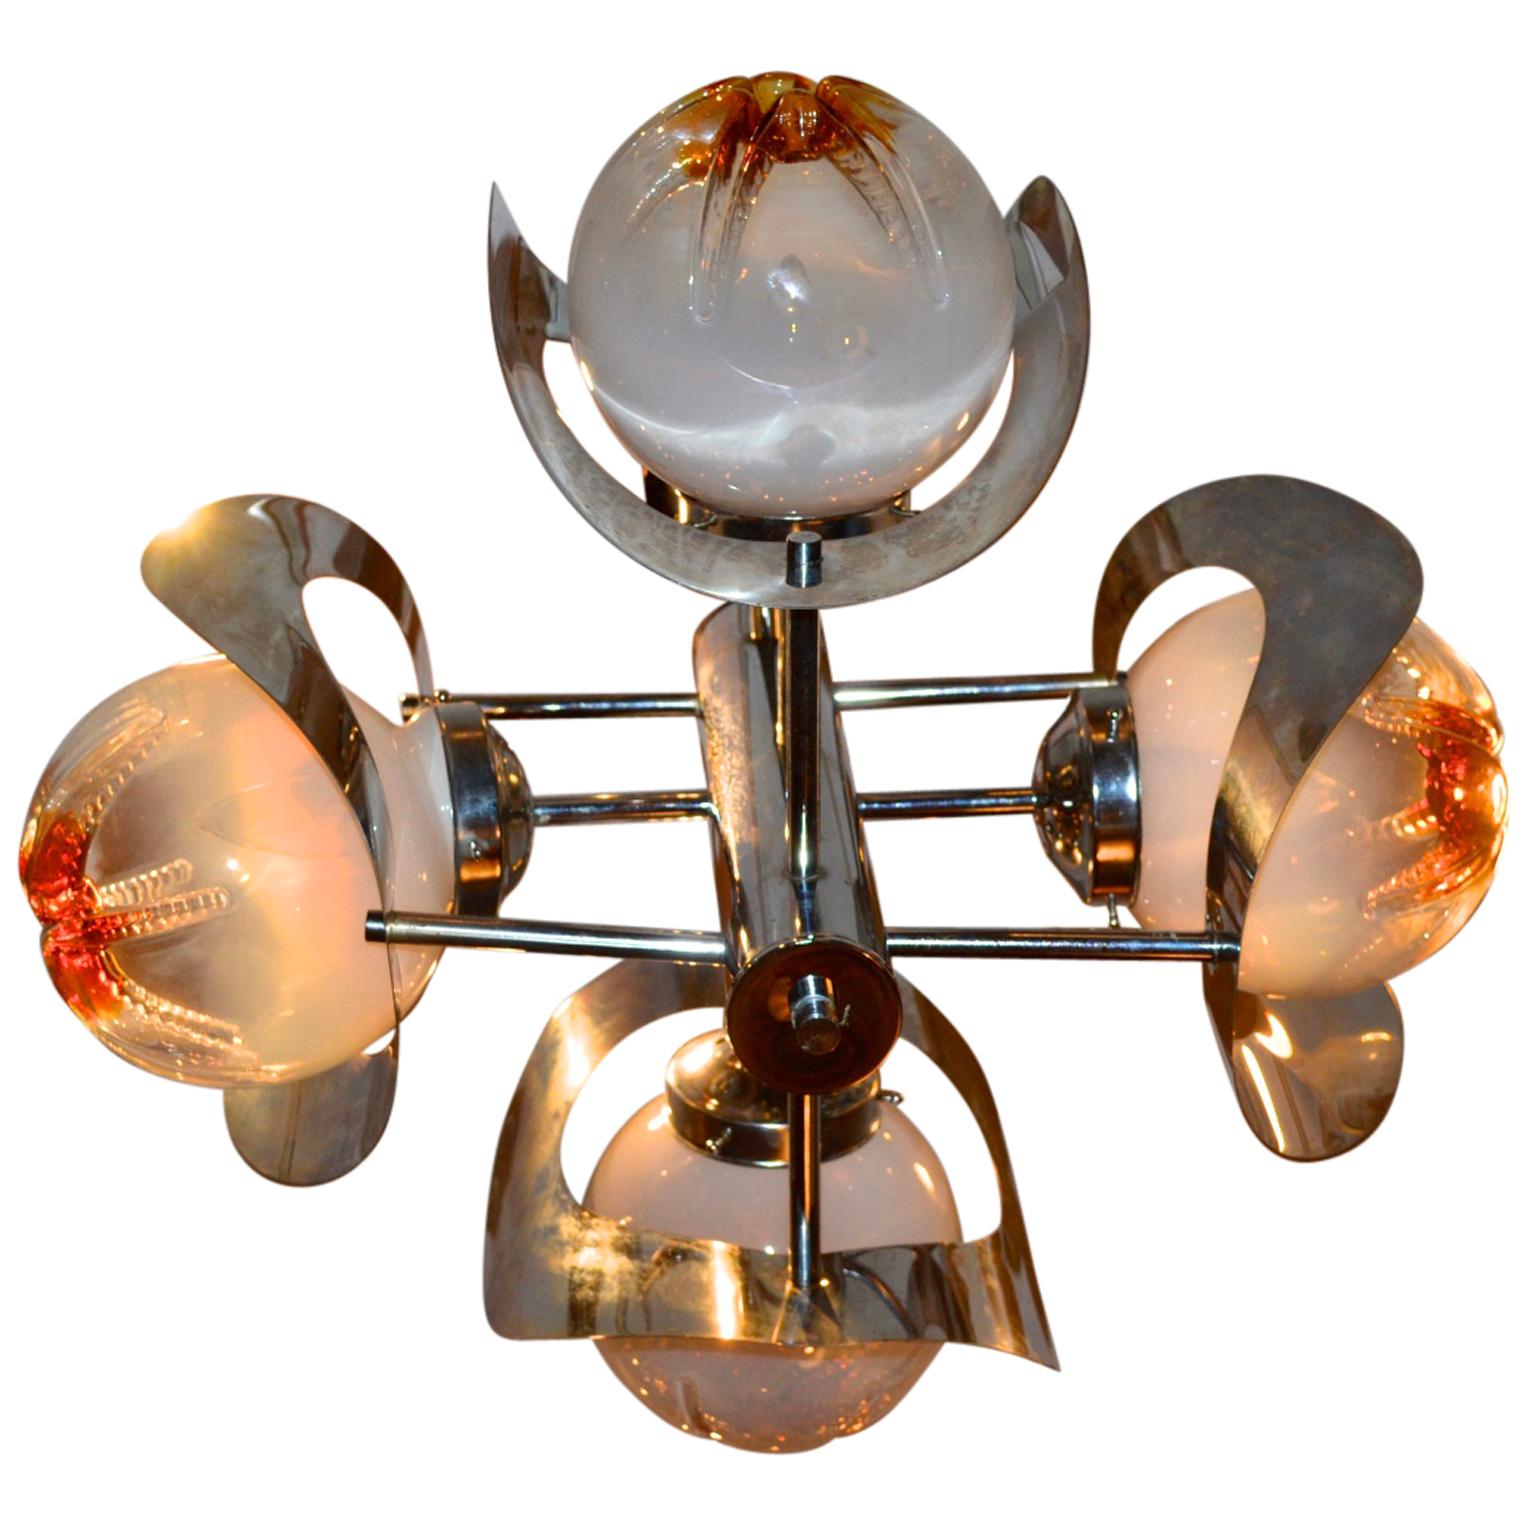 An Italian midcentury Murano art glass four light chandelier designed by Mazzega, chromed metal rod base radiating chrome arms and holding four hand blown mottled frosted amber and smoked glass orbs and curved chrome reflector shades.

   